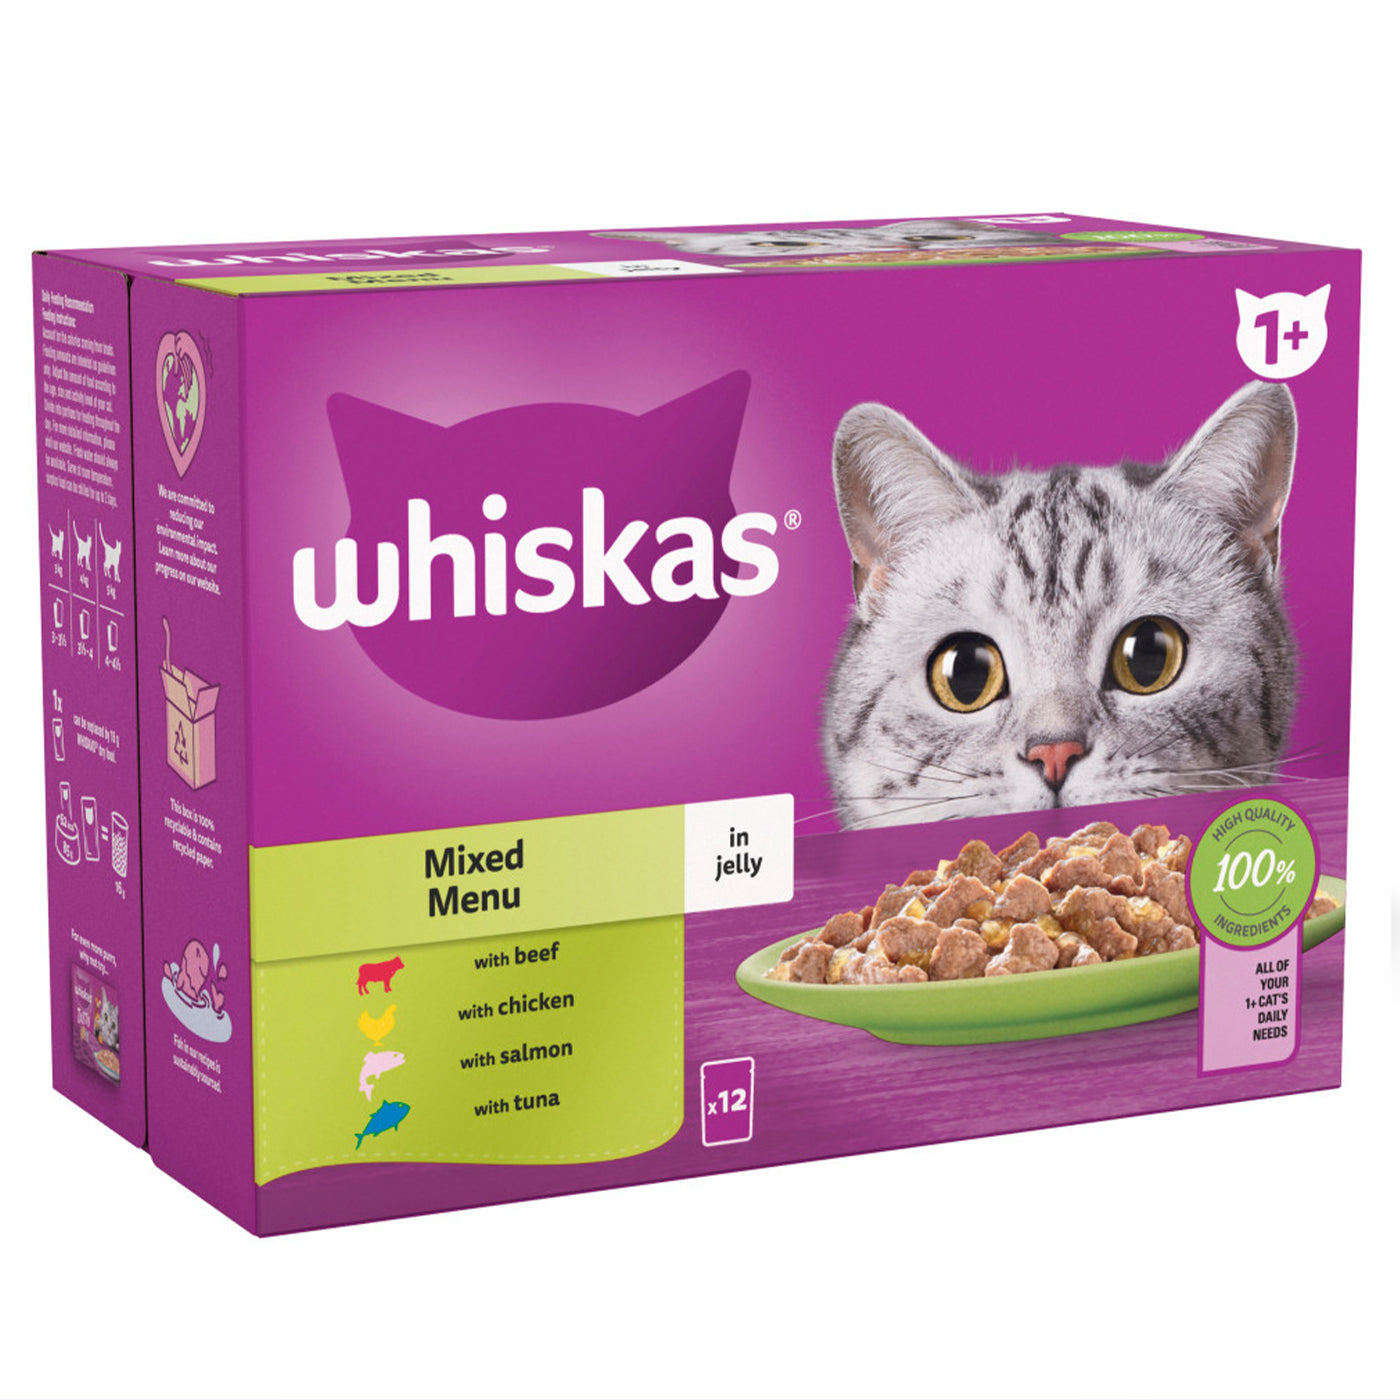 Whiskas 1+ Cat Mixed Menu in Jelly (12x85g)